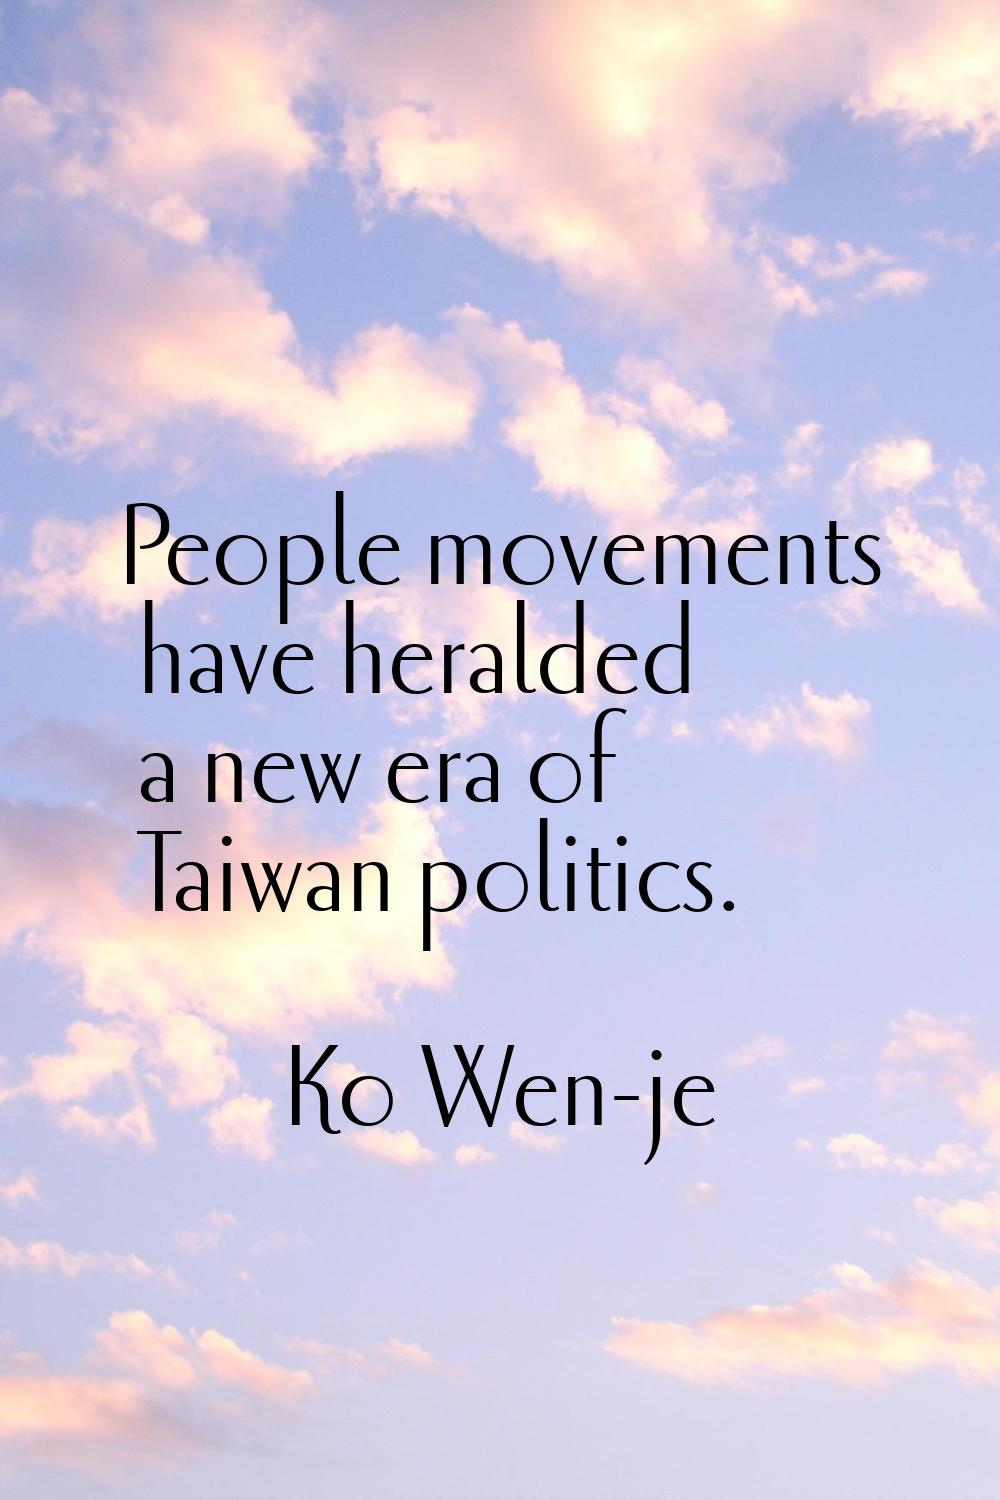 People movements have heralded a new era of Taiwan politics.